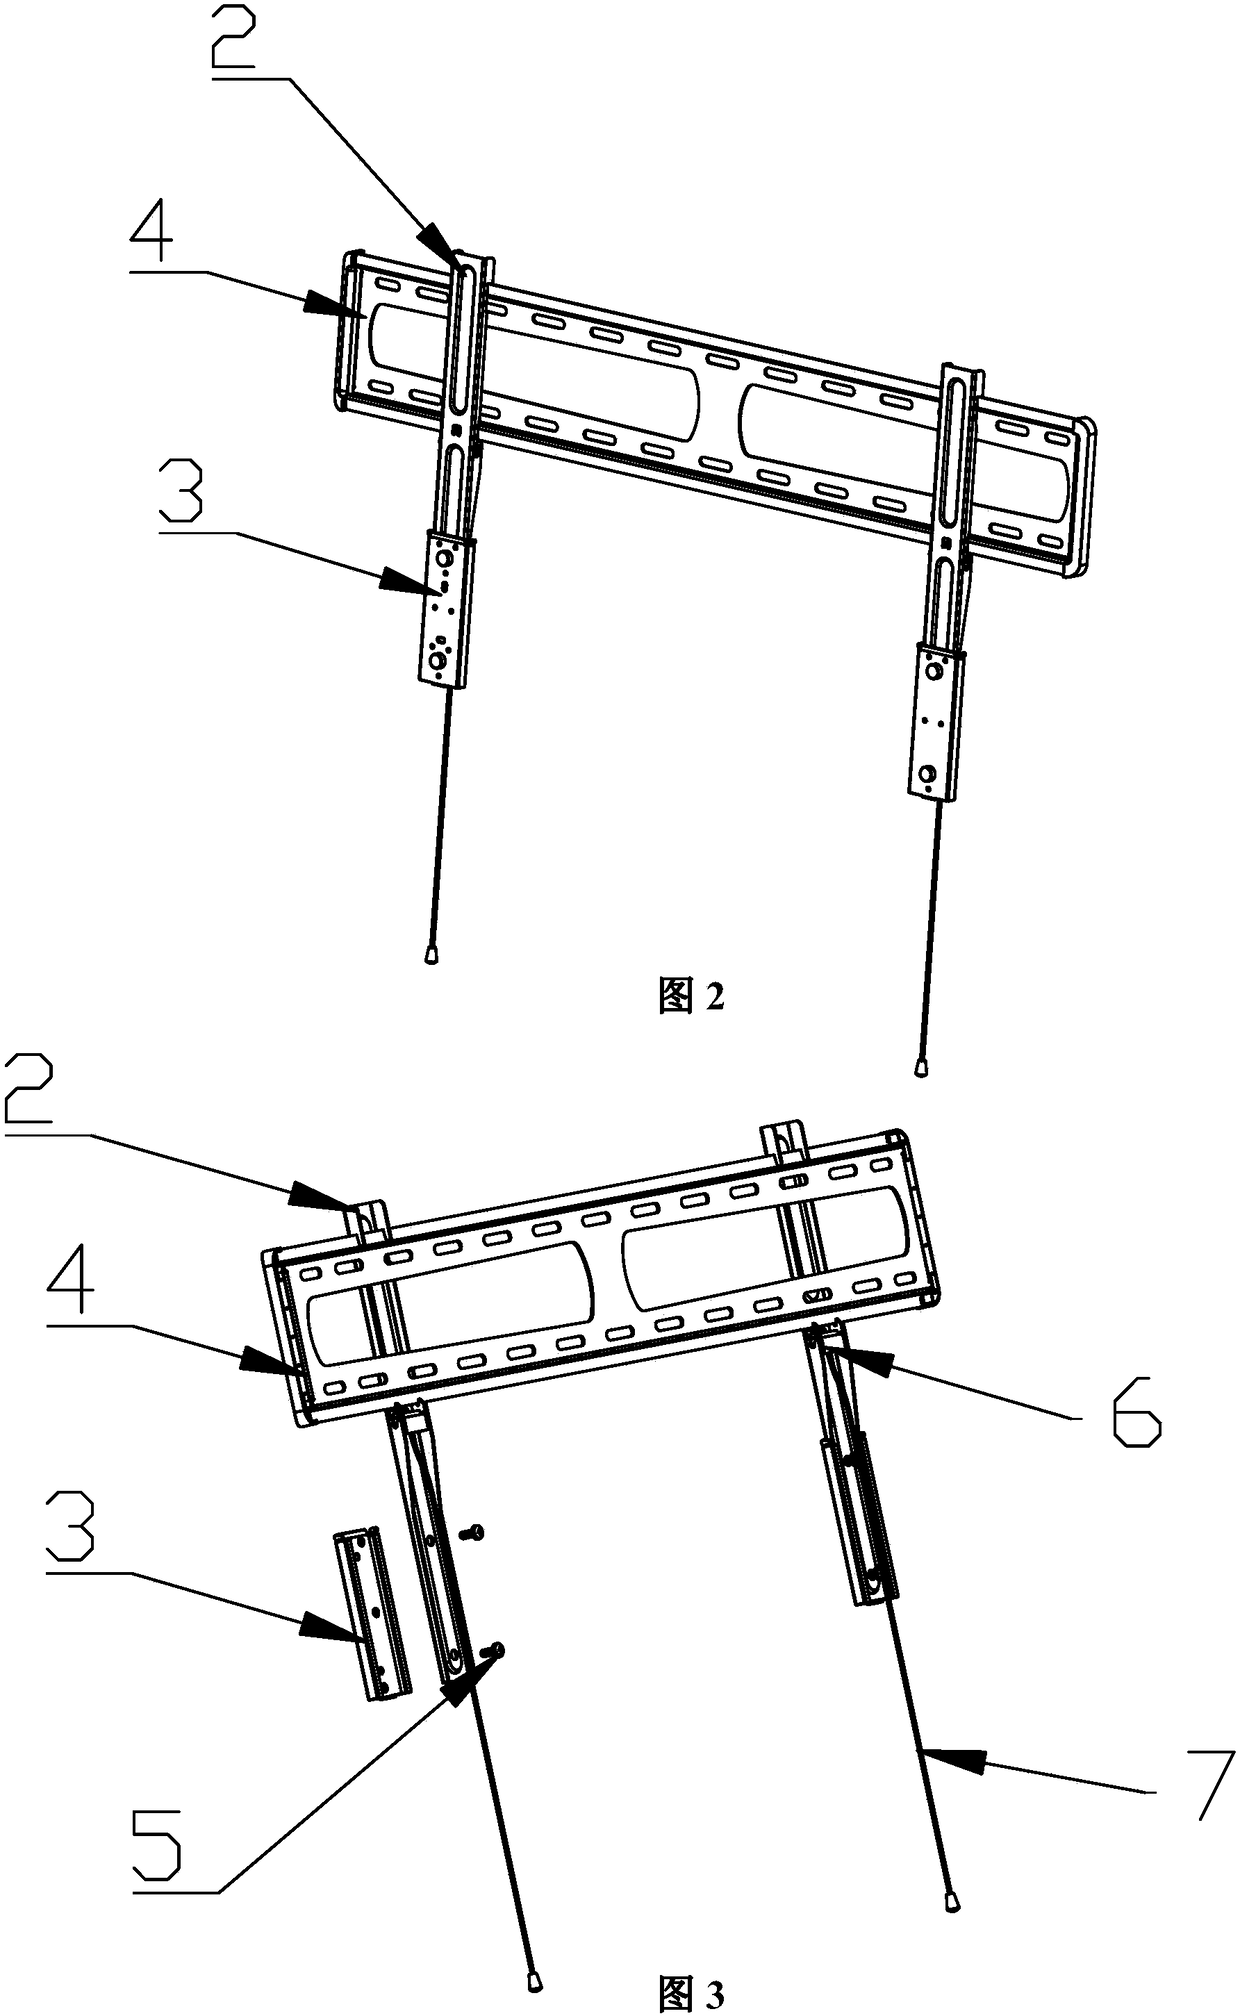 Connecting structure for display and display bracket